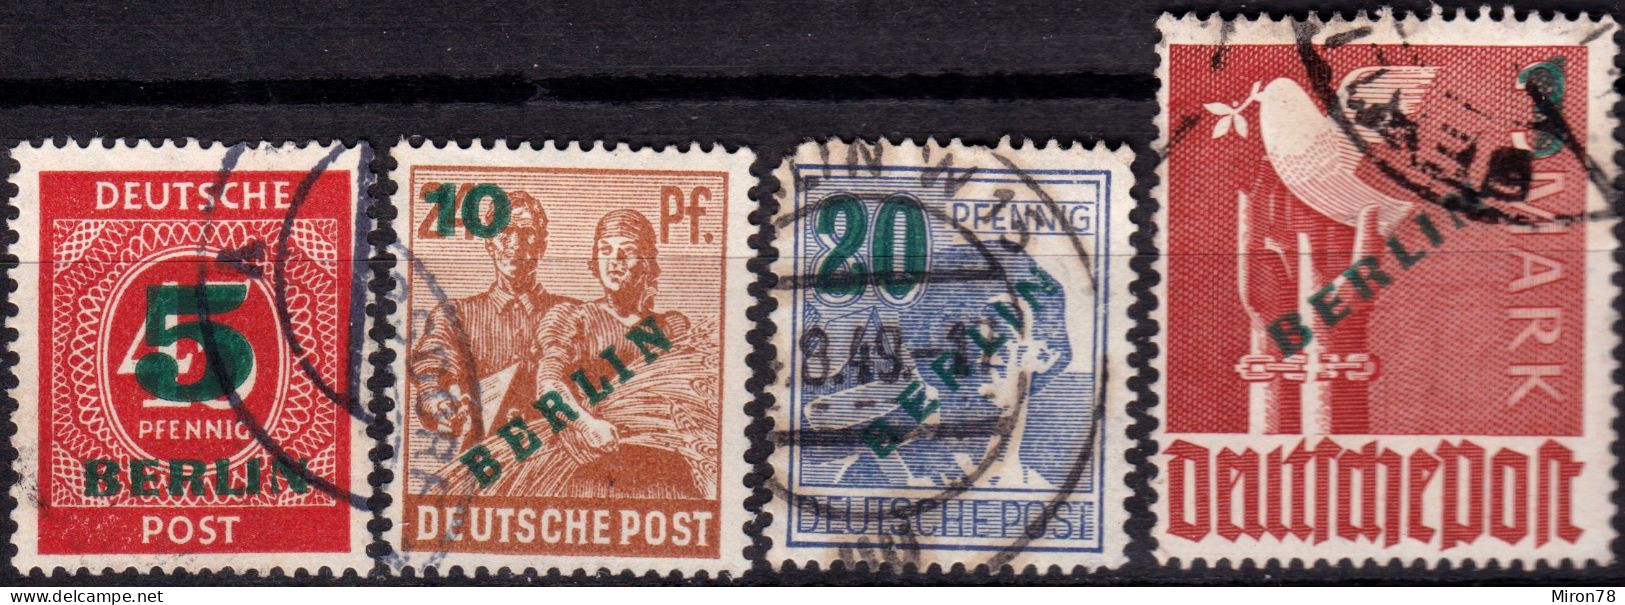 Berlin 1949, Allied Occupation, Community Editions, Mi 64 - 67 Used Lot10 - Usados